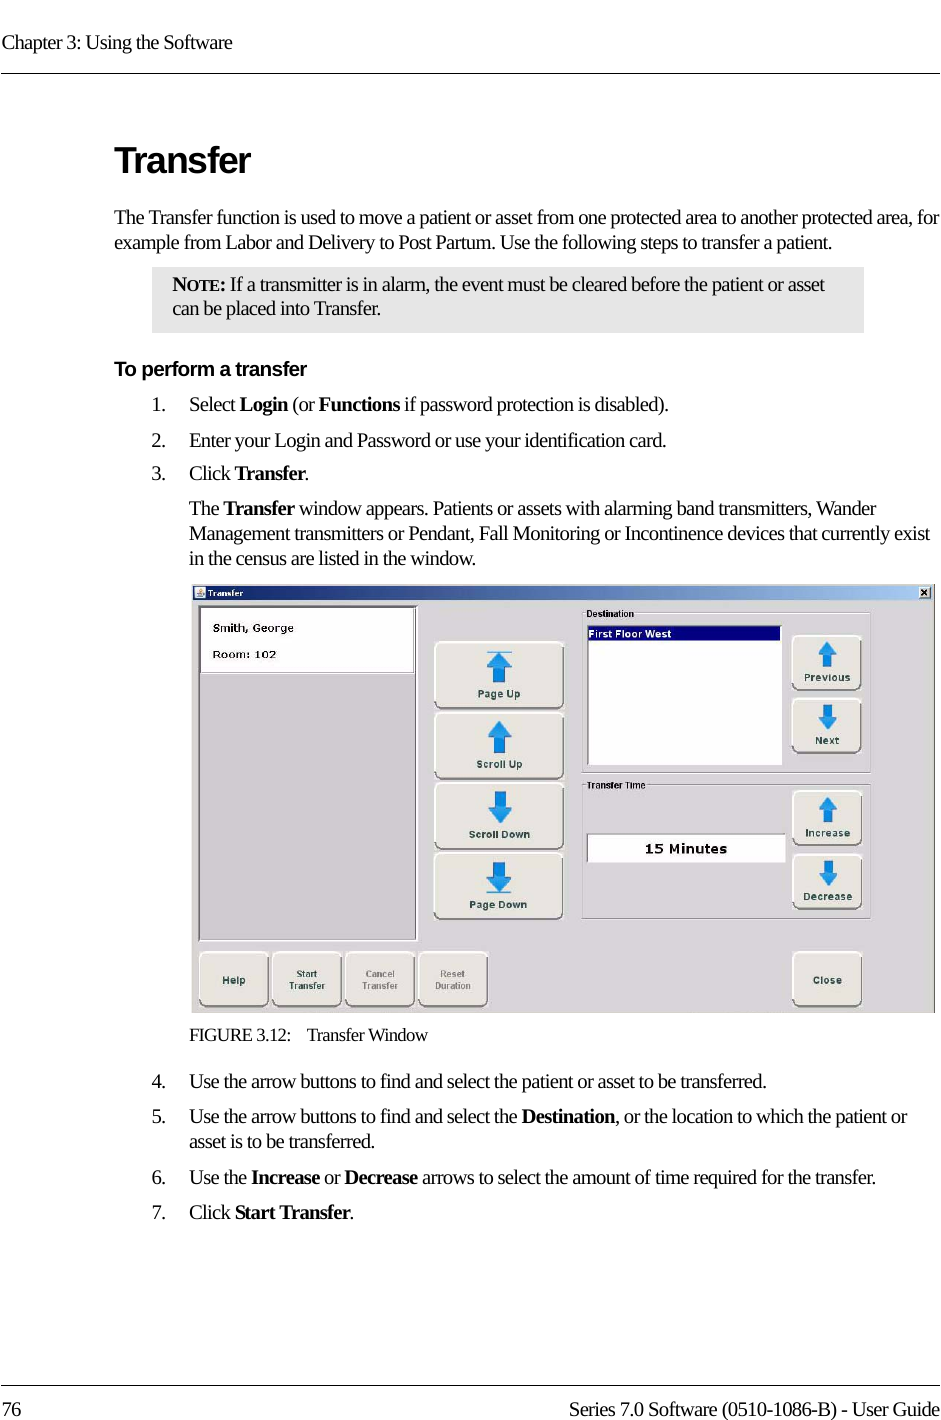 Chapter 3: Using the Software76 Series 7.0 Software (0510-1086-B) - User GuideTransferThe Transfer function is used to move a patient or asset from one protected area to another protected area, for example from Labor and Delivery to Post Partum. Use the following steps to transfer a patient.To perform a transfer1.    Select Login (or Functions if password protection is disabled).2.    Enter your Login and Password or use your identification card. 3.    Click Transfer. The Transfer window appears. Patients or assets with alarming band transmitters, Wander Management transmitters or Pendant, Fall Monitoring or Incontinence devices that currently exist in the census are listed in the window.FIGURE 3.12:    Transfer Window4.    Use the arrow buttons to find and select the patient or asset to be transferred.5.    Use the arrow buttons to find and select the Destination, or the location to which the patient or asset is to be transferred.6.    Use the Increase or Decrease arrows to select the amount of time required for the transfer. 7.    Click Start Transfer.NOTE: If a transmitter is in alarm, the event must be cleared before the patient or asset can be placed into Transfer.